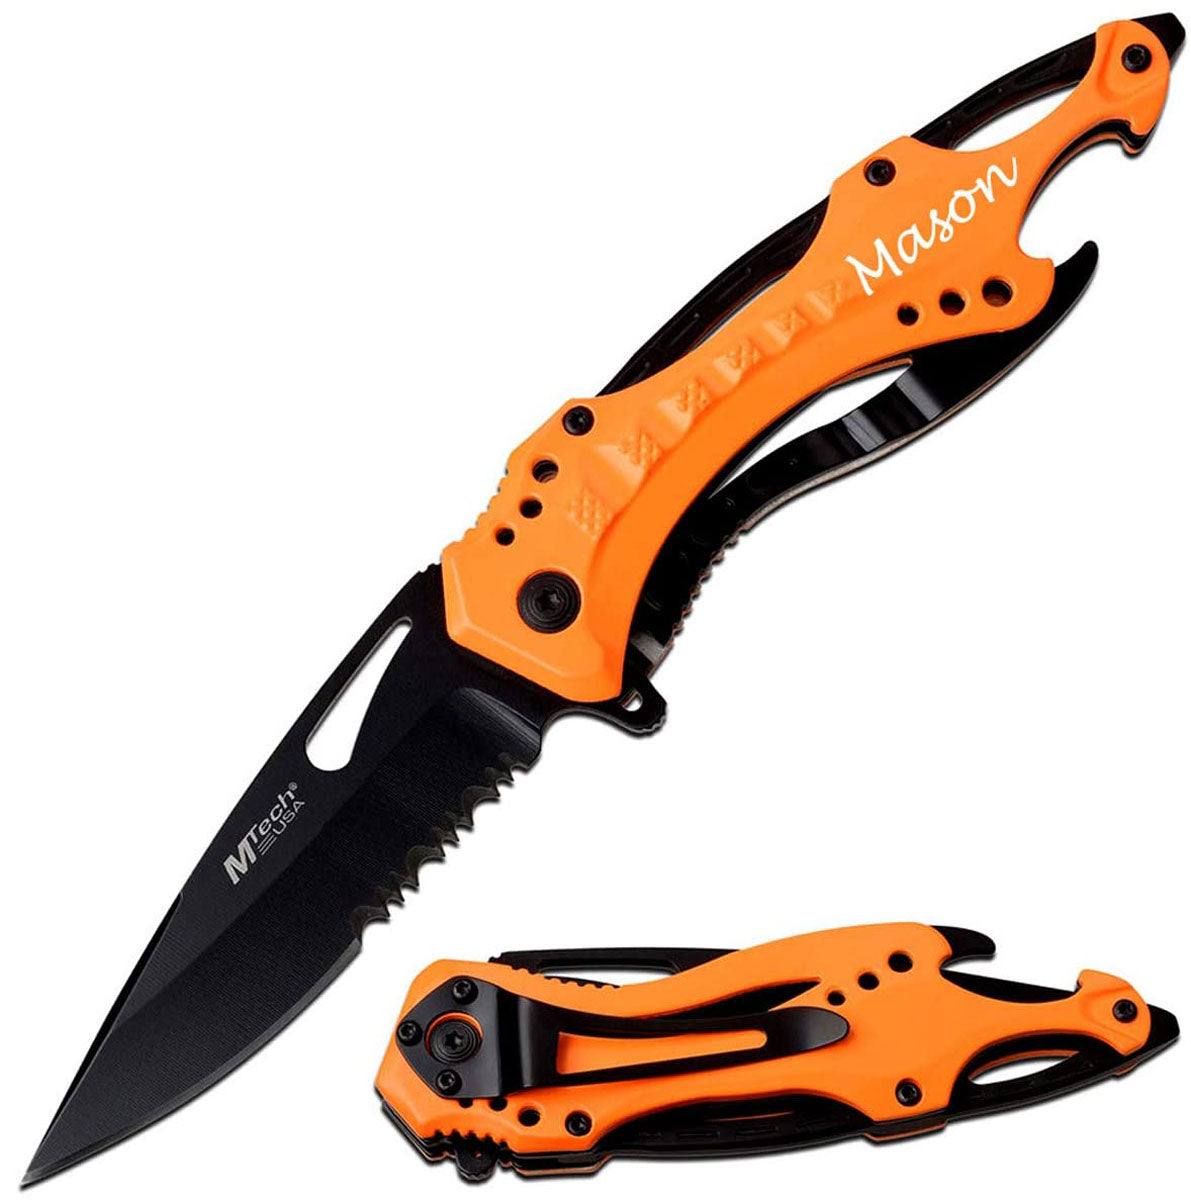 GIFTS INFINITY 4.5" Closed Personalized Engraved Folding Pocket Knife, Black Stainless Steel Tactical Blade Knife with Orange Handle